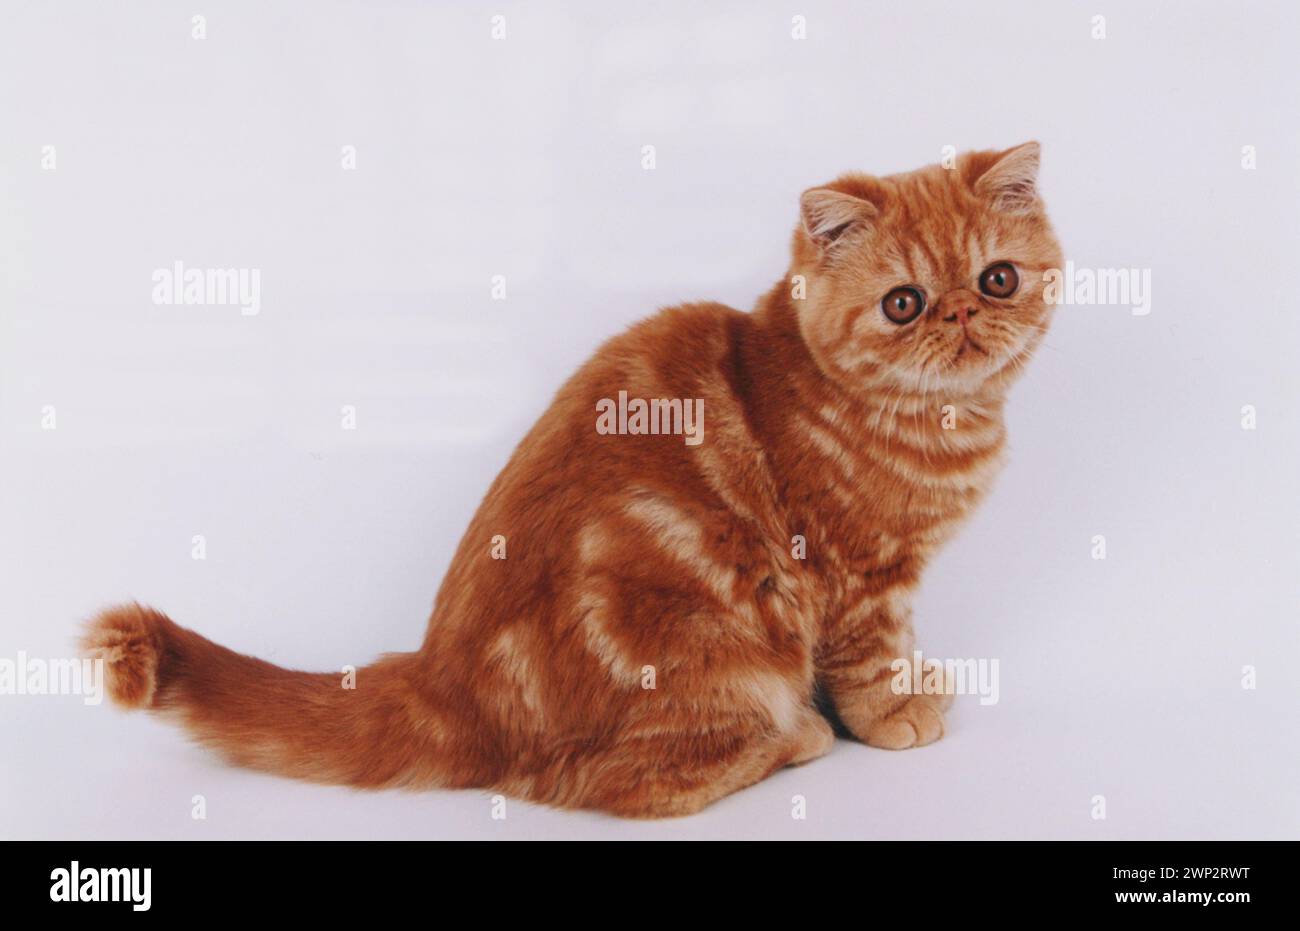 Adorable Persian Exotic Red Tabby Kitten on White Stock Photo